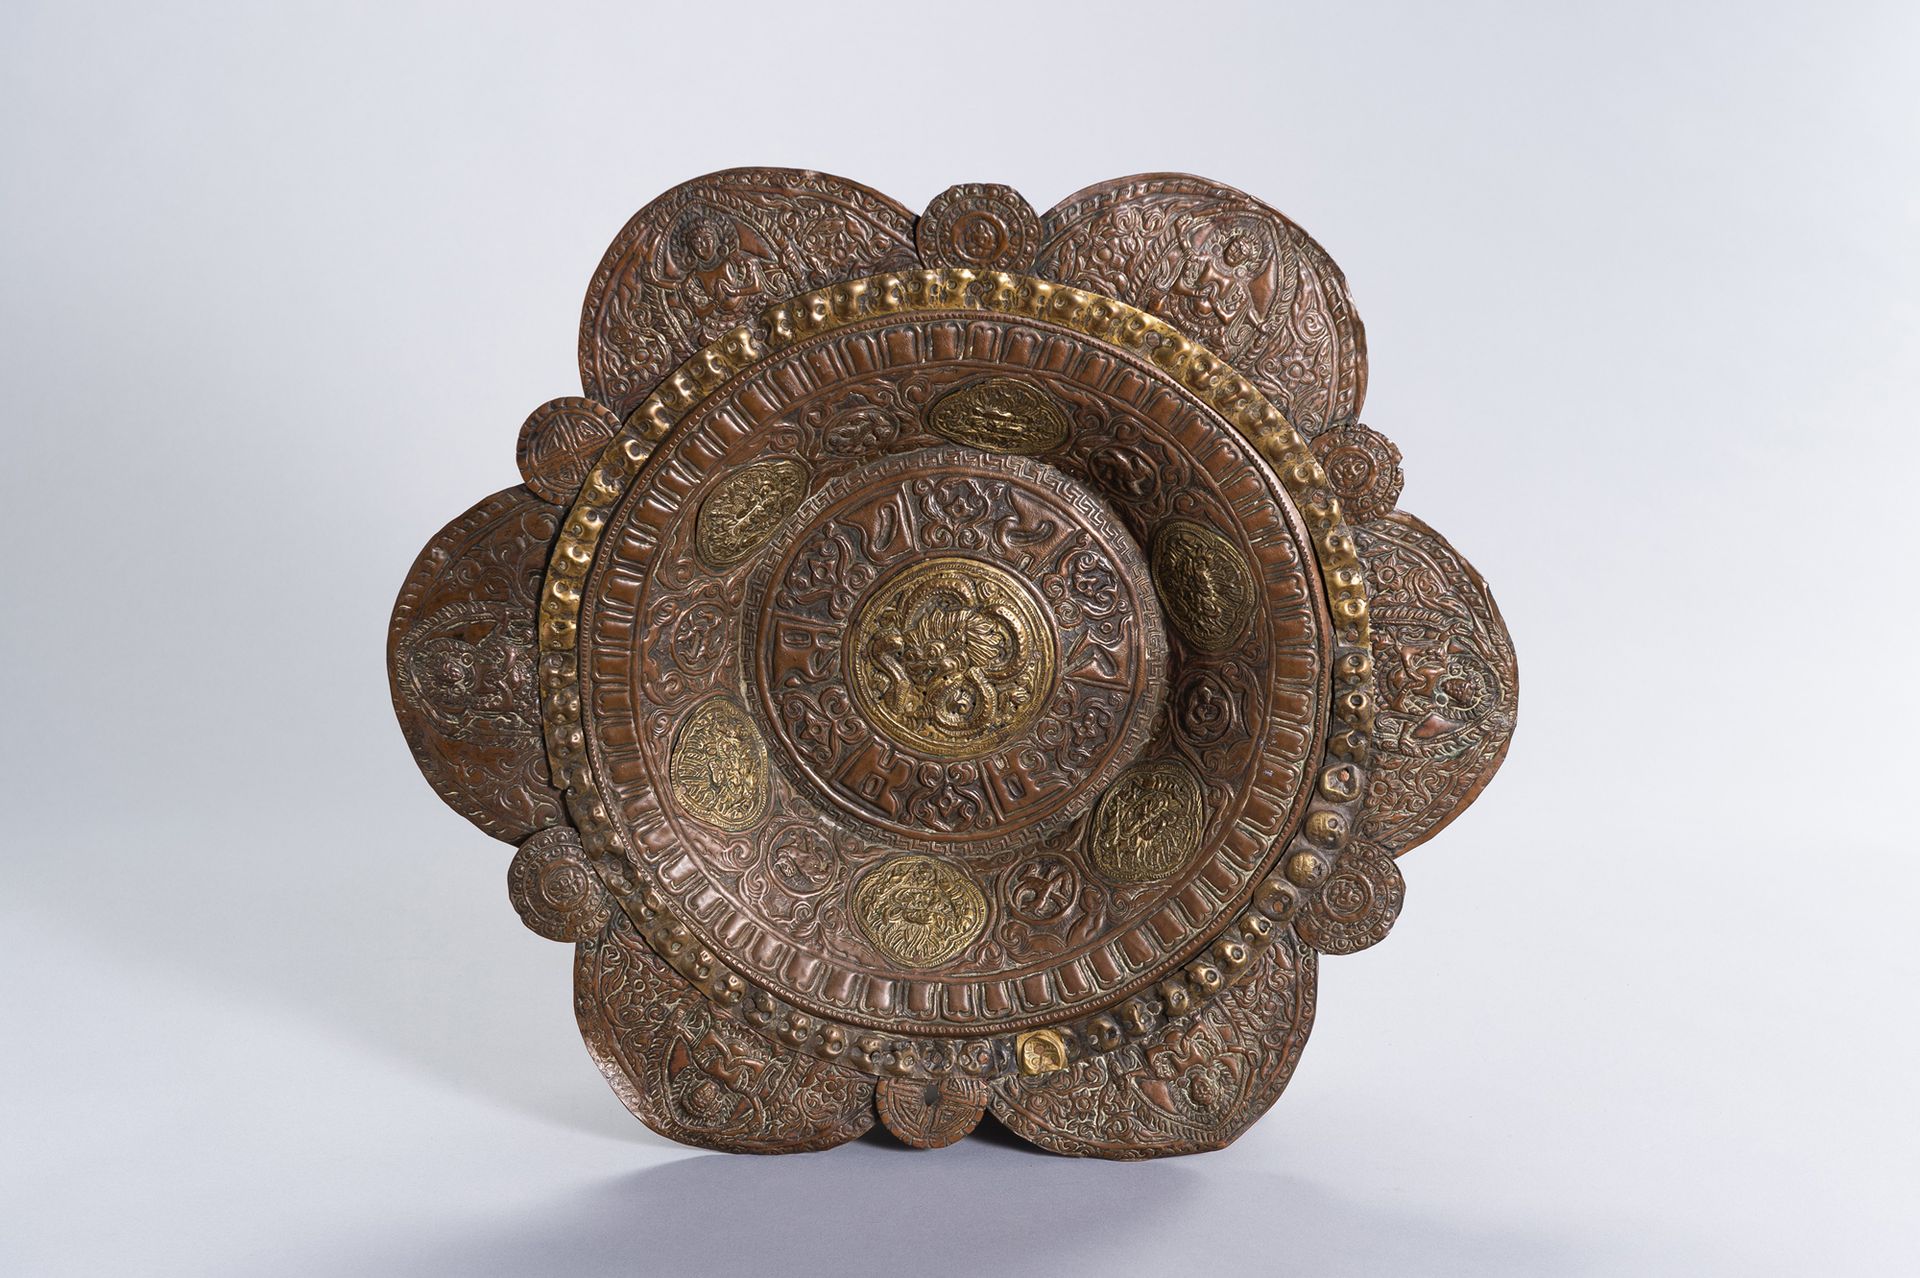 A LARGE COPPER REPOUSSE ALMS DISH GROSSE KUPFERNE REPOUSSE ALMS-SCHEIBE
Tibetisc&hellip;